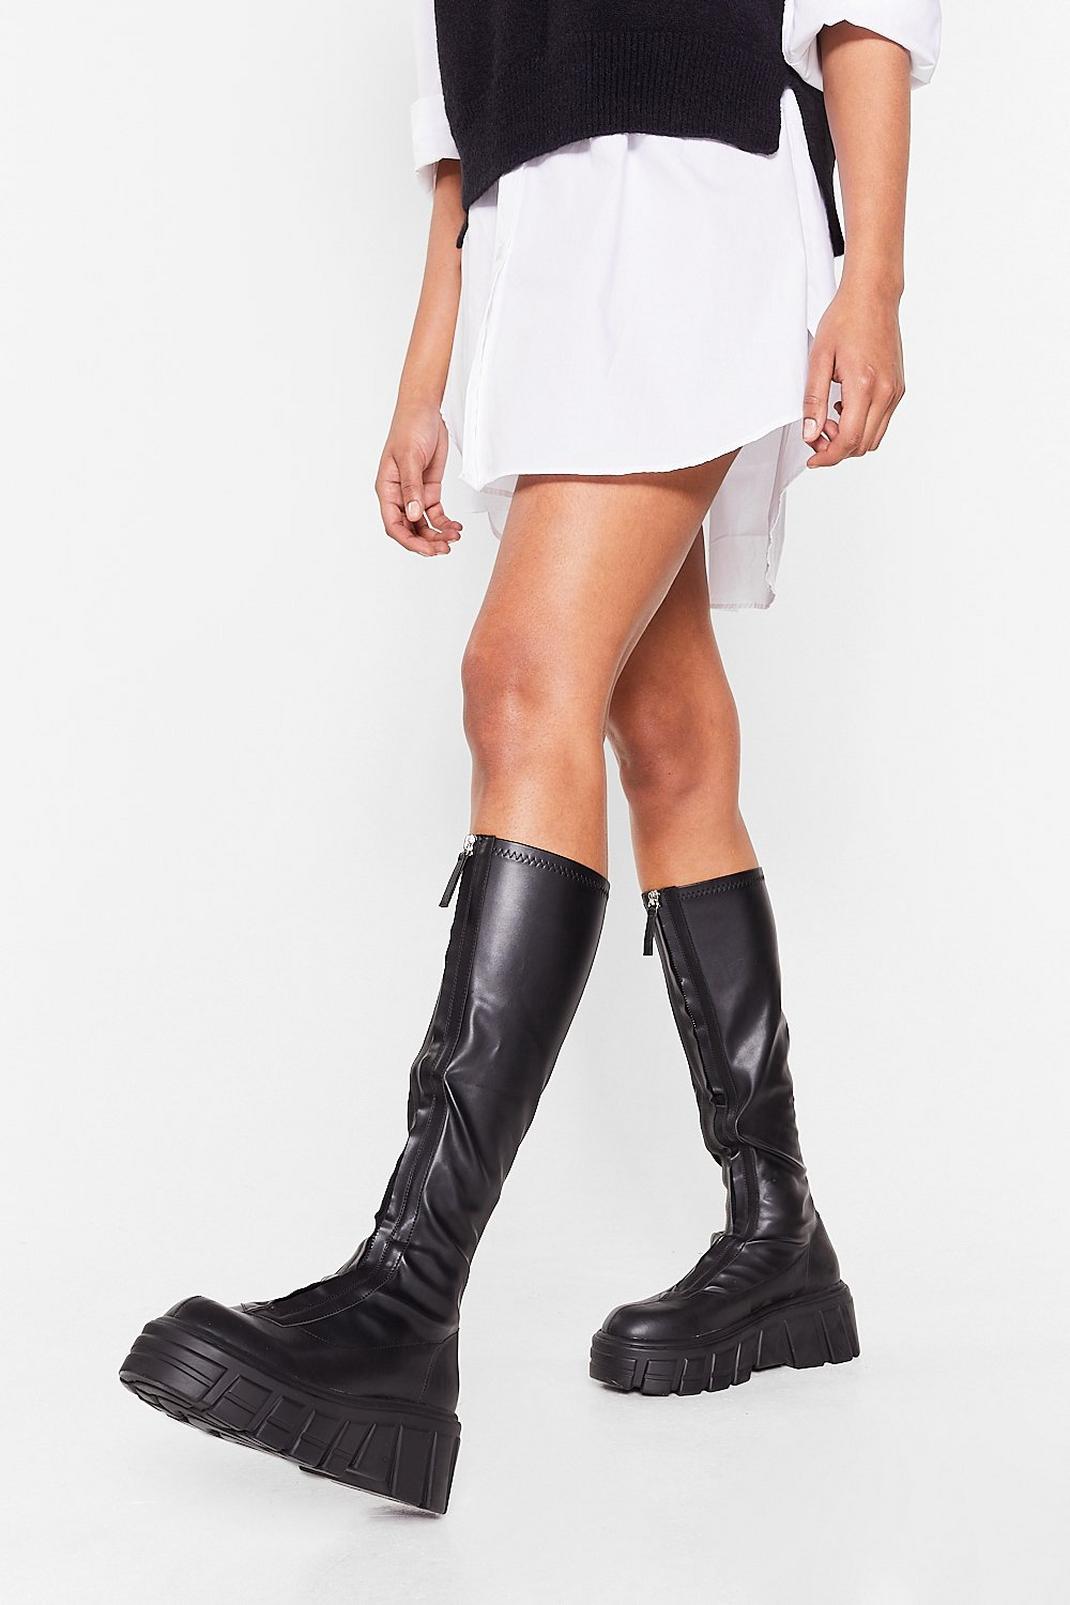 Faux Leather Calf High Cleated Wellie Boots